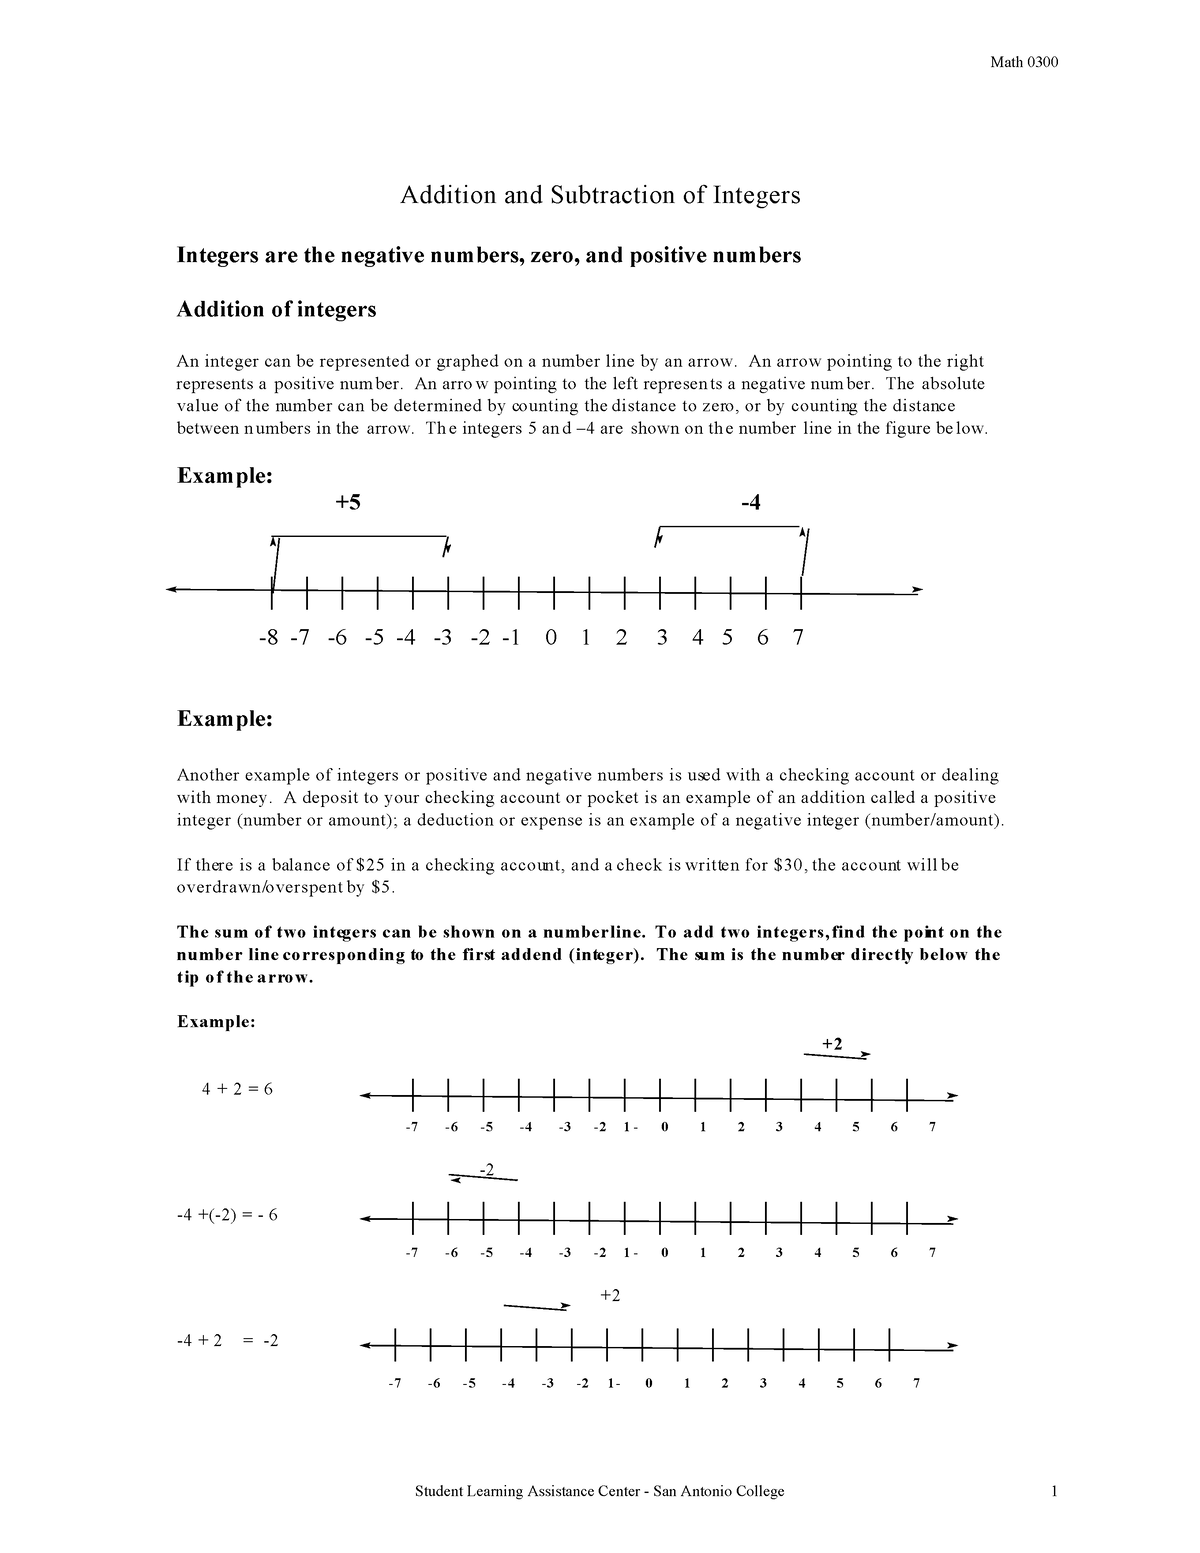 math0300-addd-and-subtract-integers-addition-and-subtraction-of